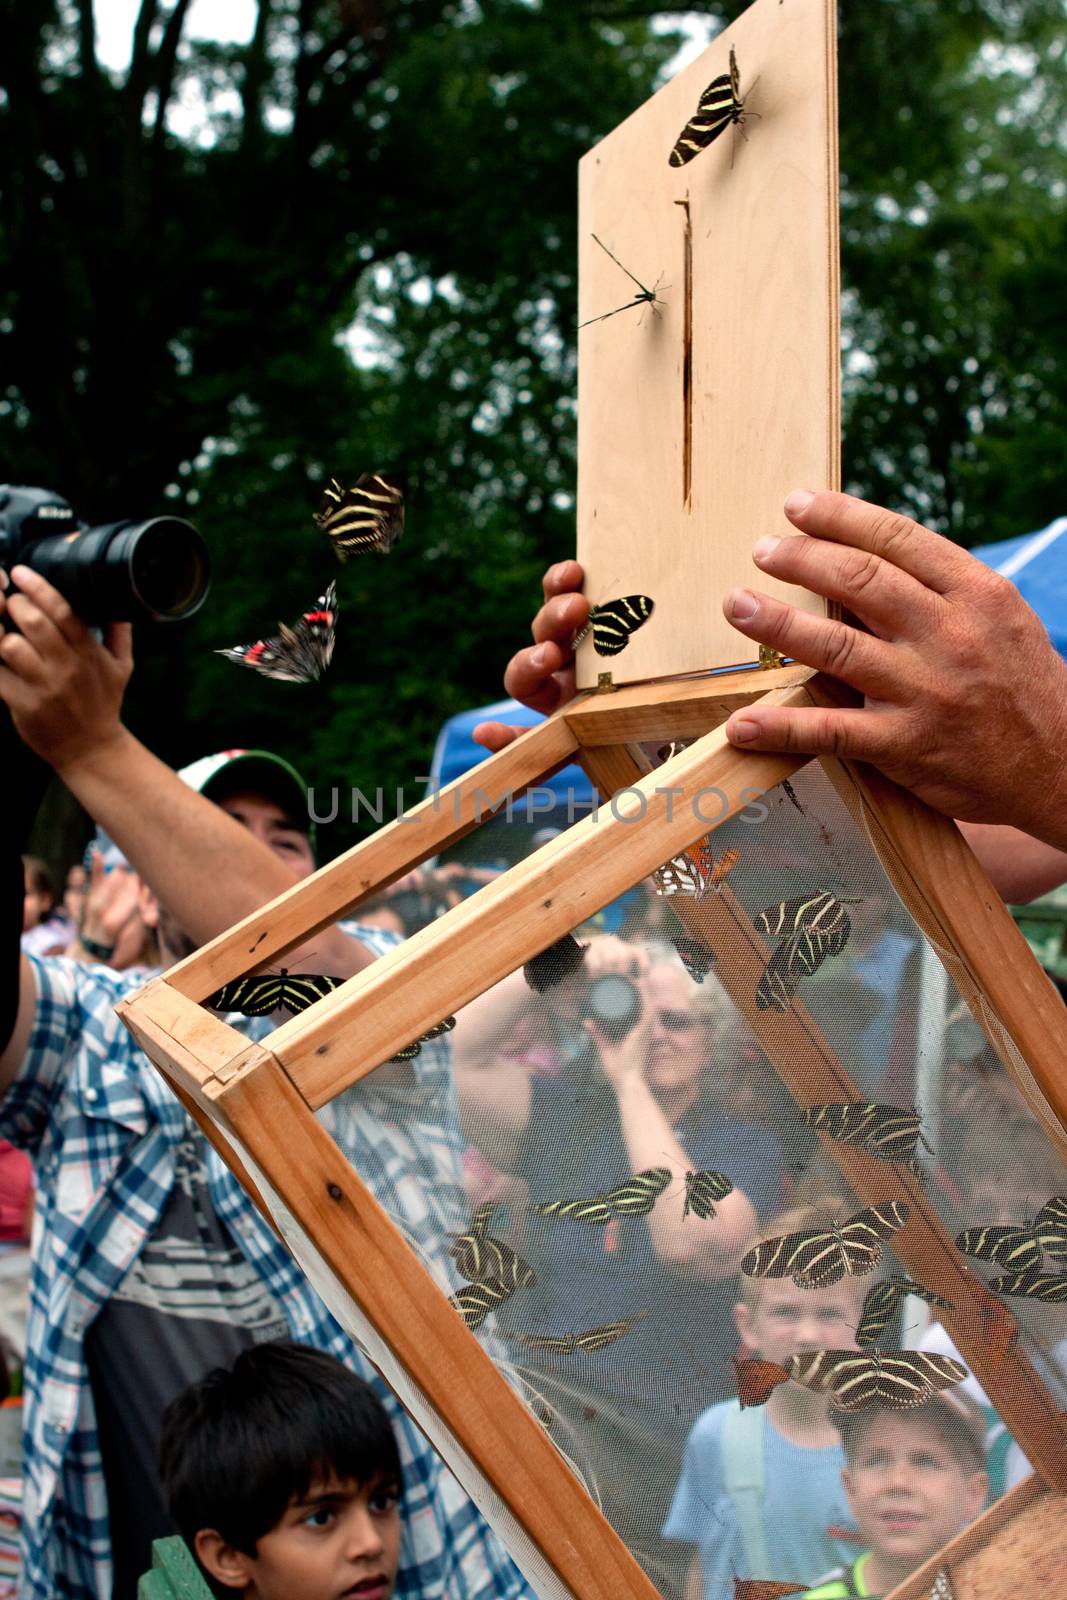 Roswell, GA, USA - July 13, 2013:  Butterflies are released from a box as spectators look on, at the Chattahoochee Nature Center's Butterfly Festival.  